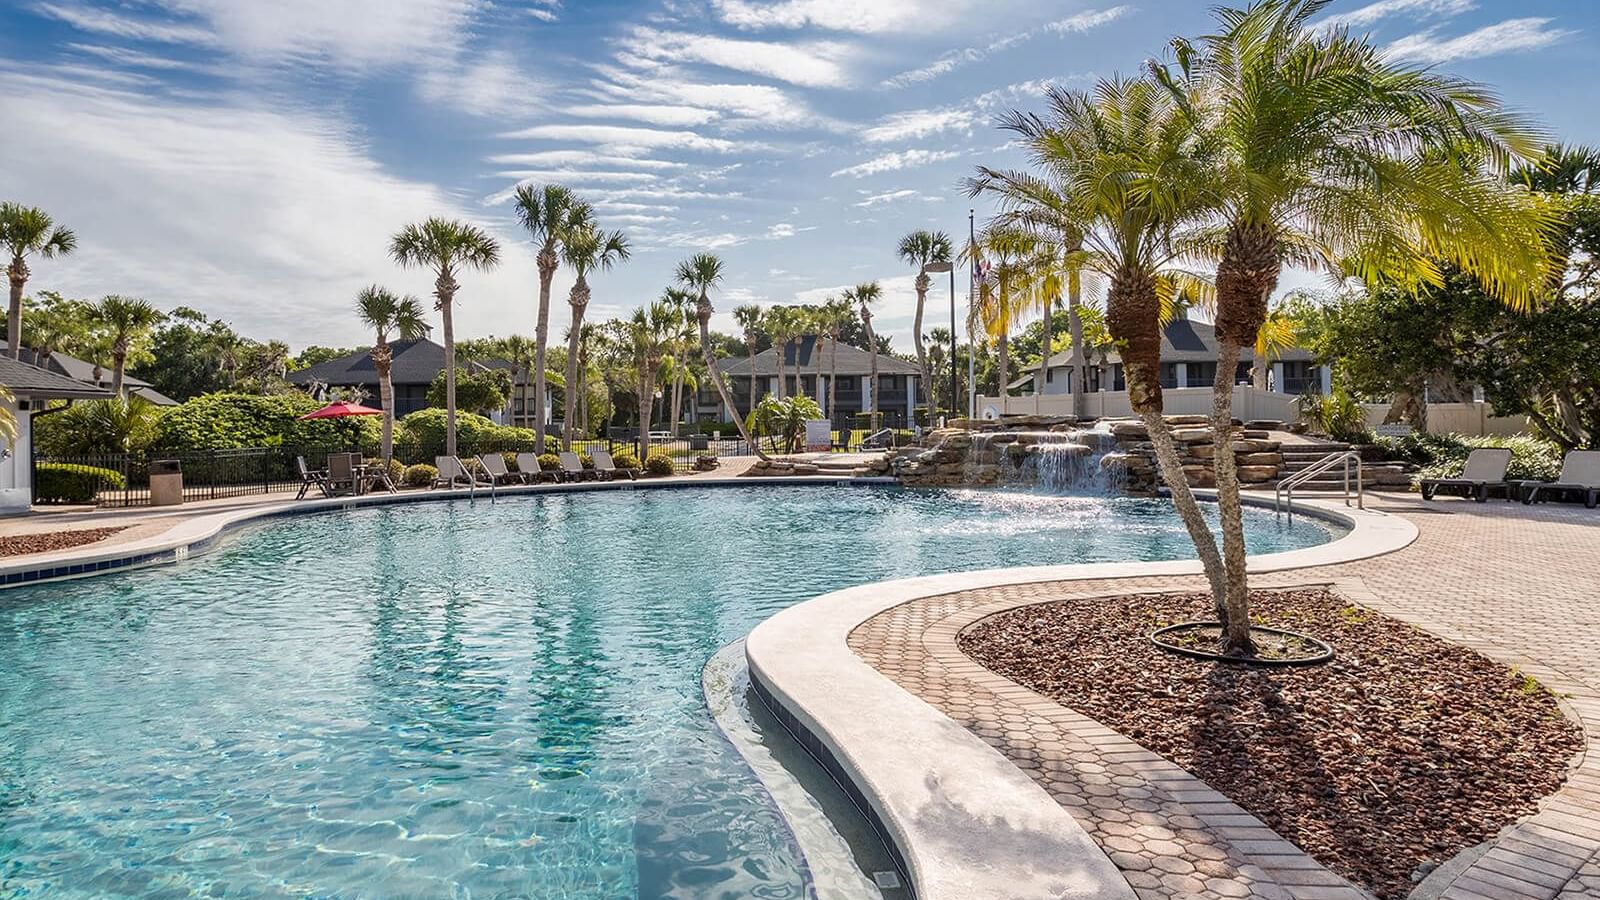  Outdoor pool area in Palm Coast at Legacy Vacation Resorts 